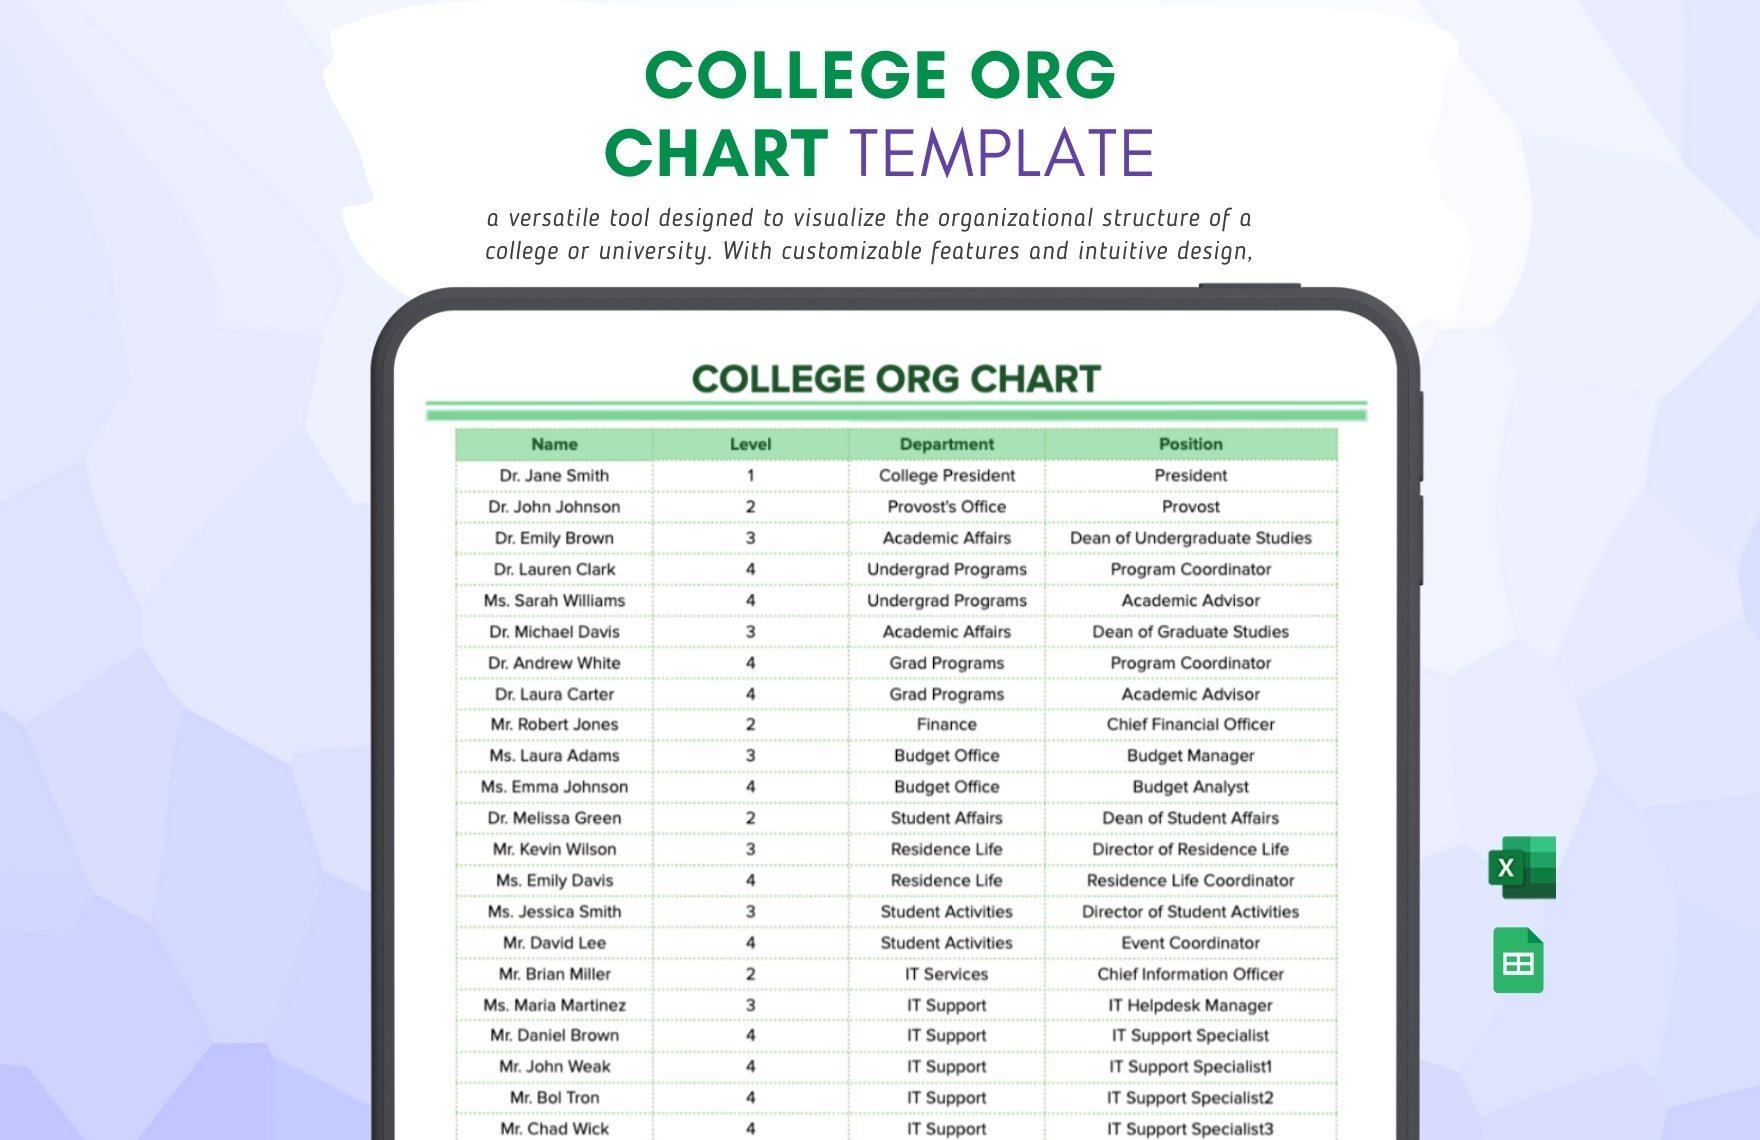 College Org Chart Template in Excel, Google Sheets